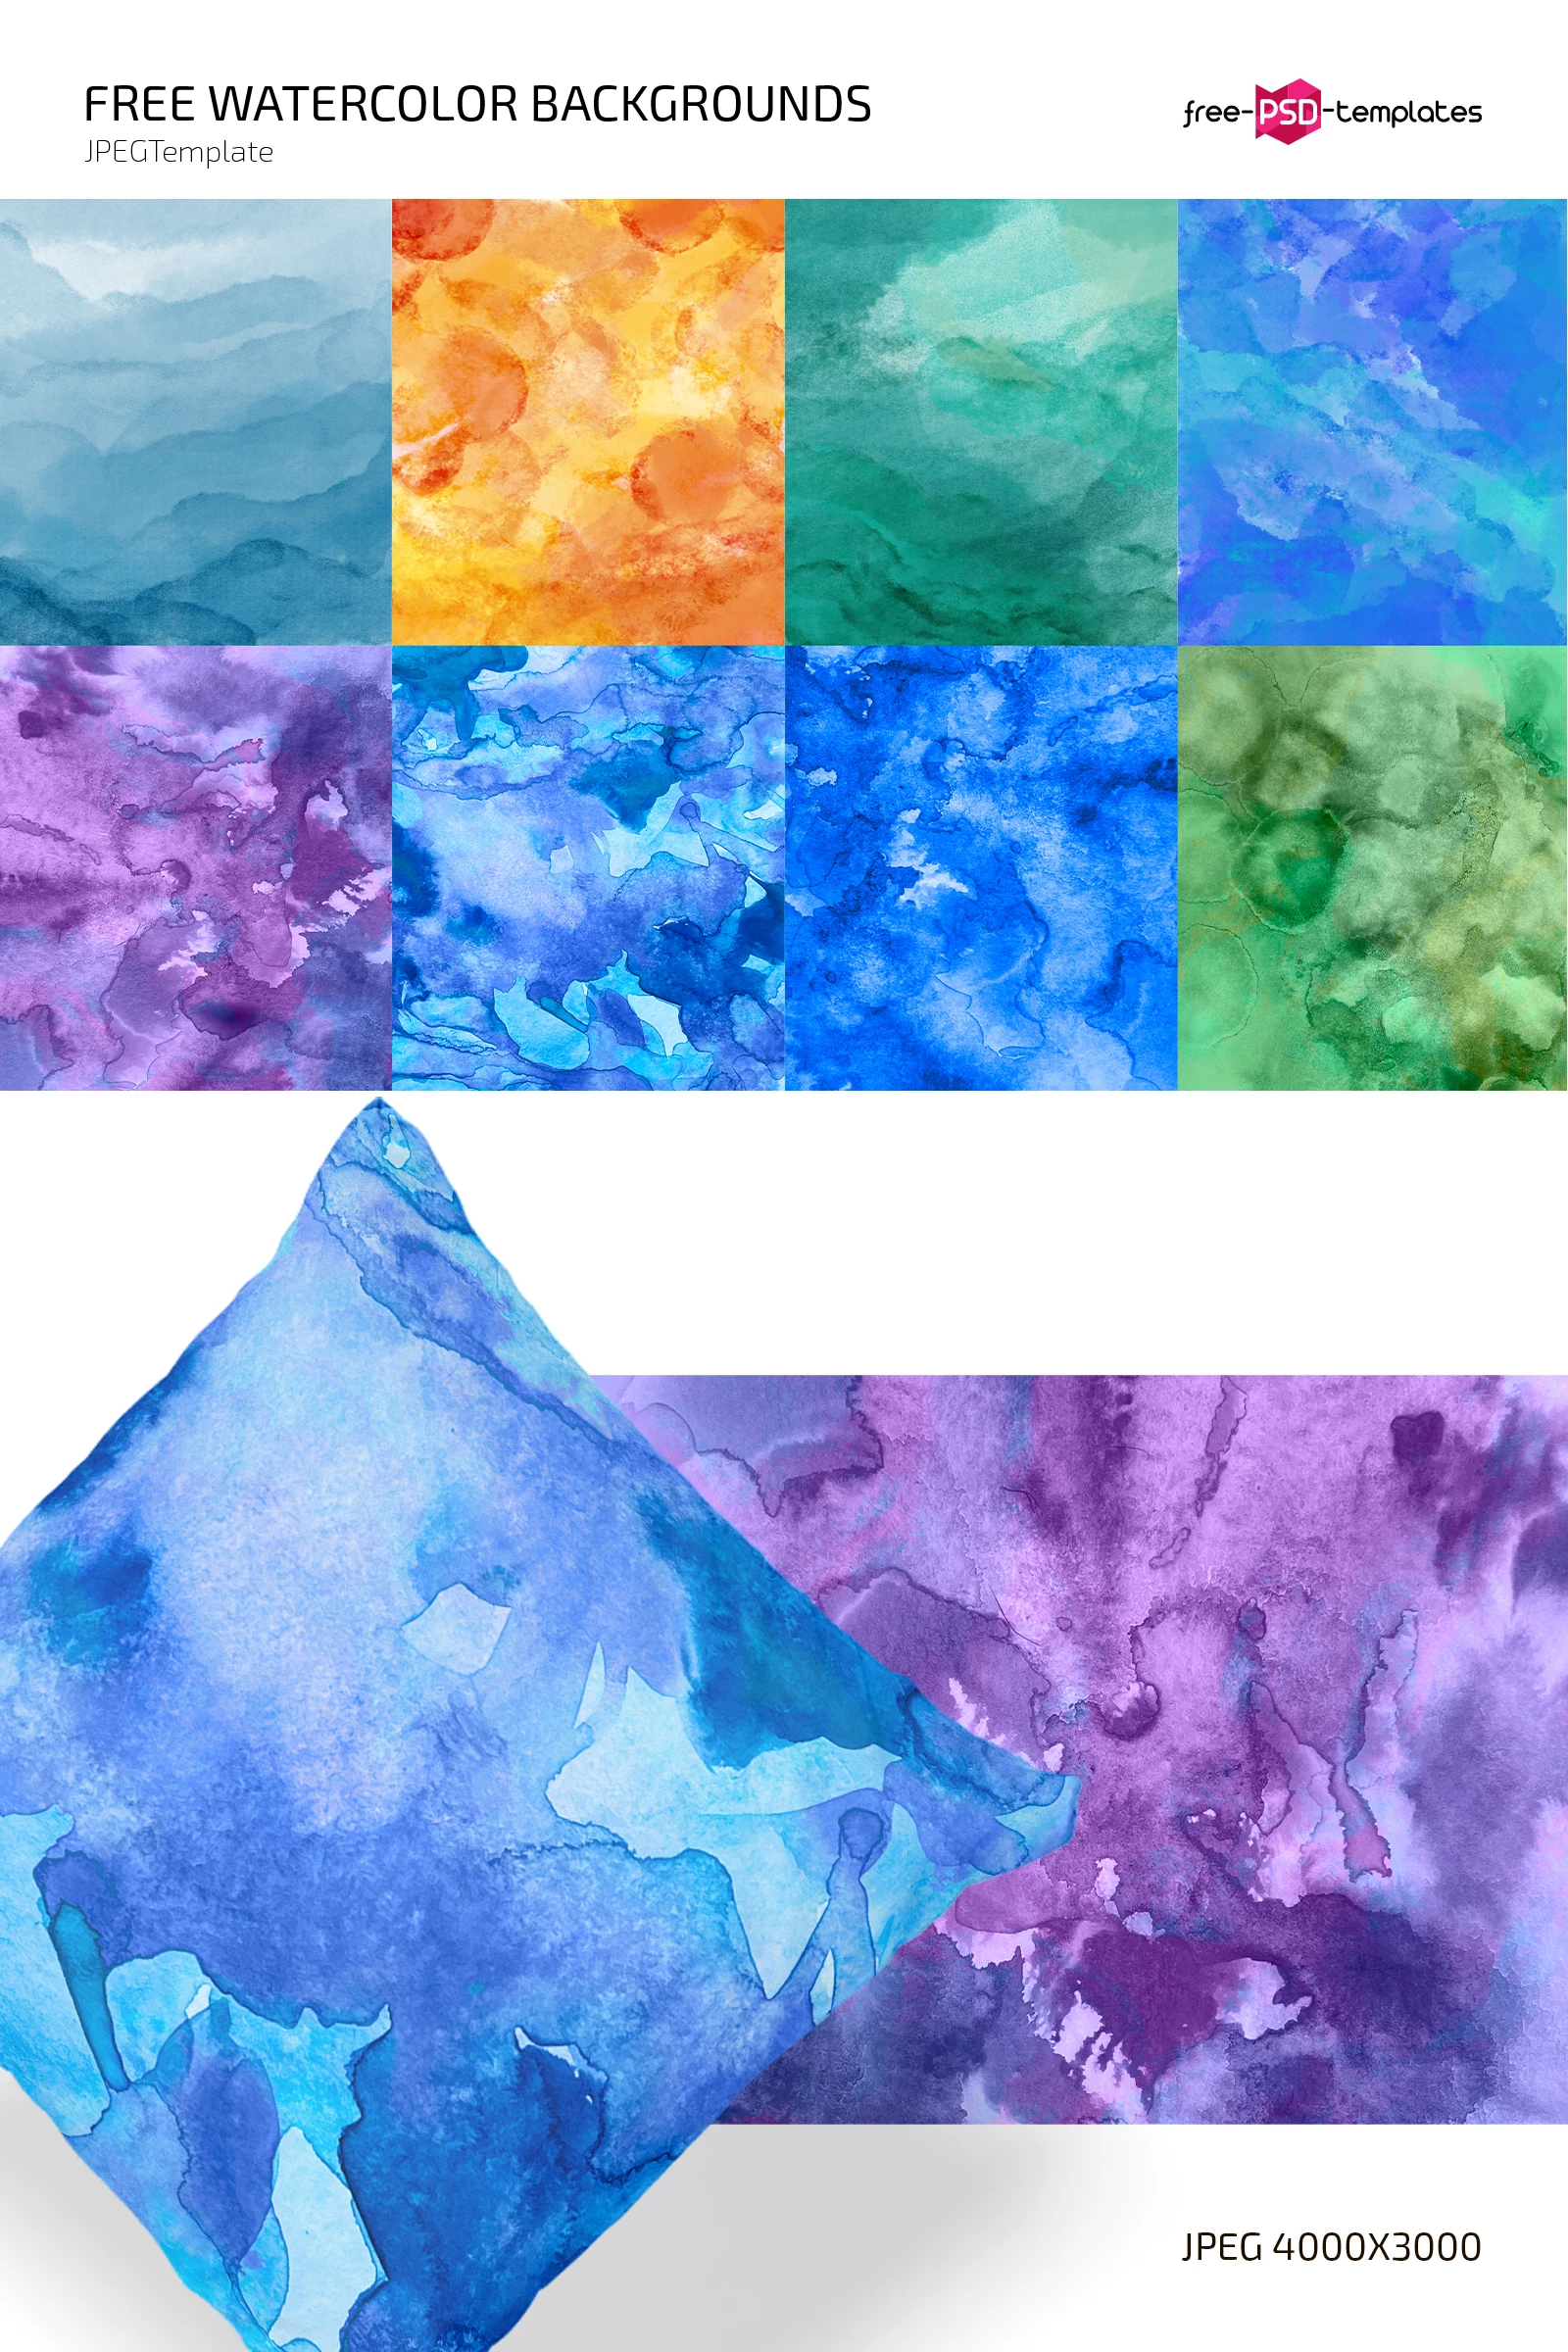 Free Colorful Textured Watercolor